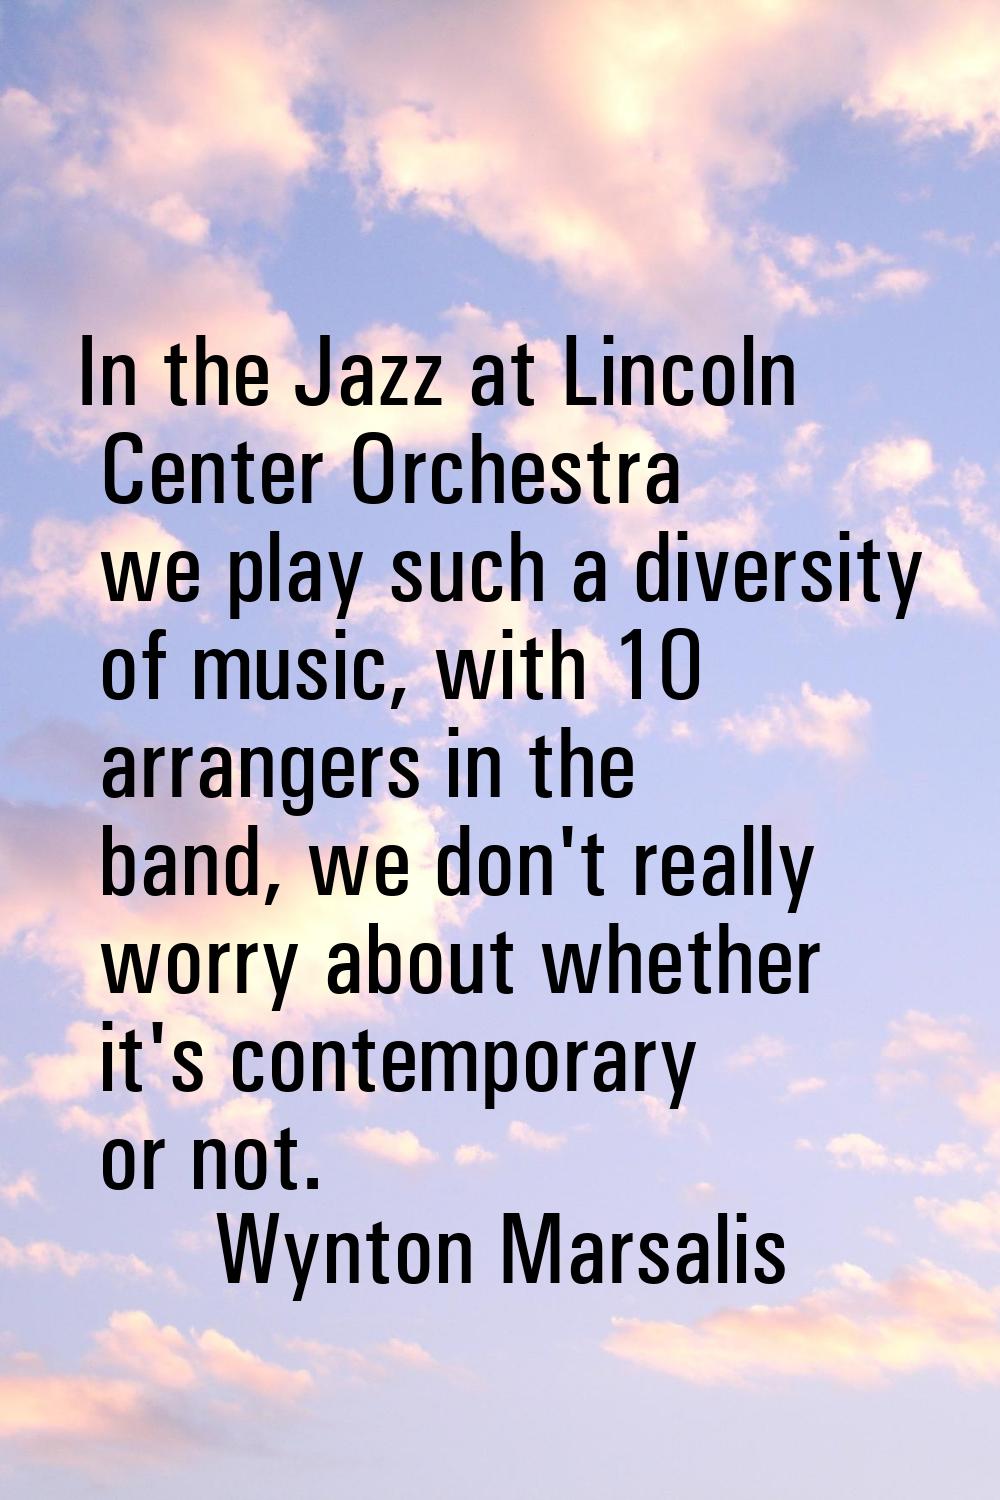 In the Jazz at Lincoln Center Orchestra we play such a diversity of music, with 10 arrangers in the